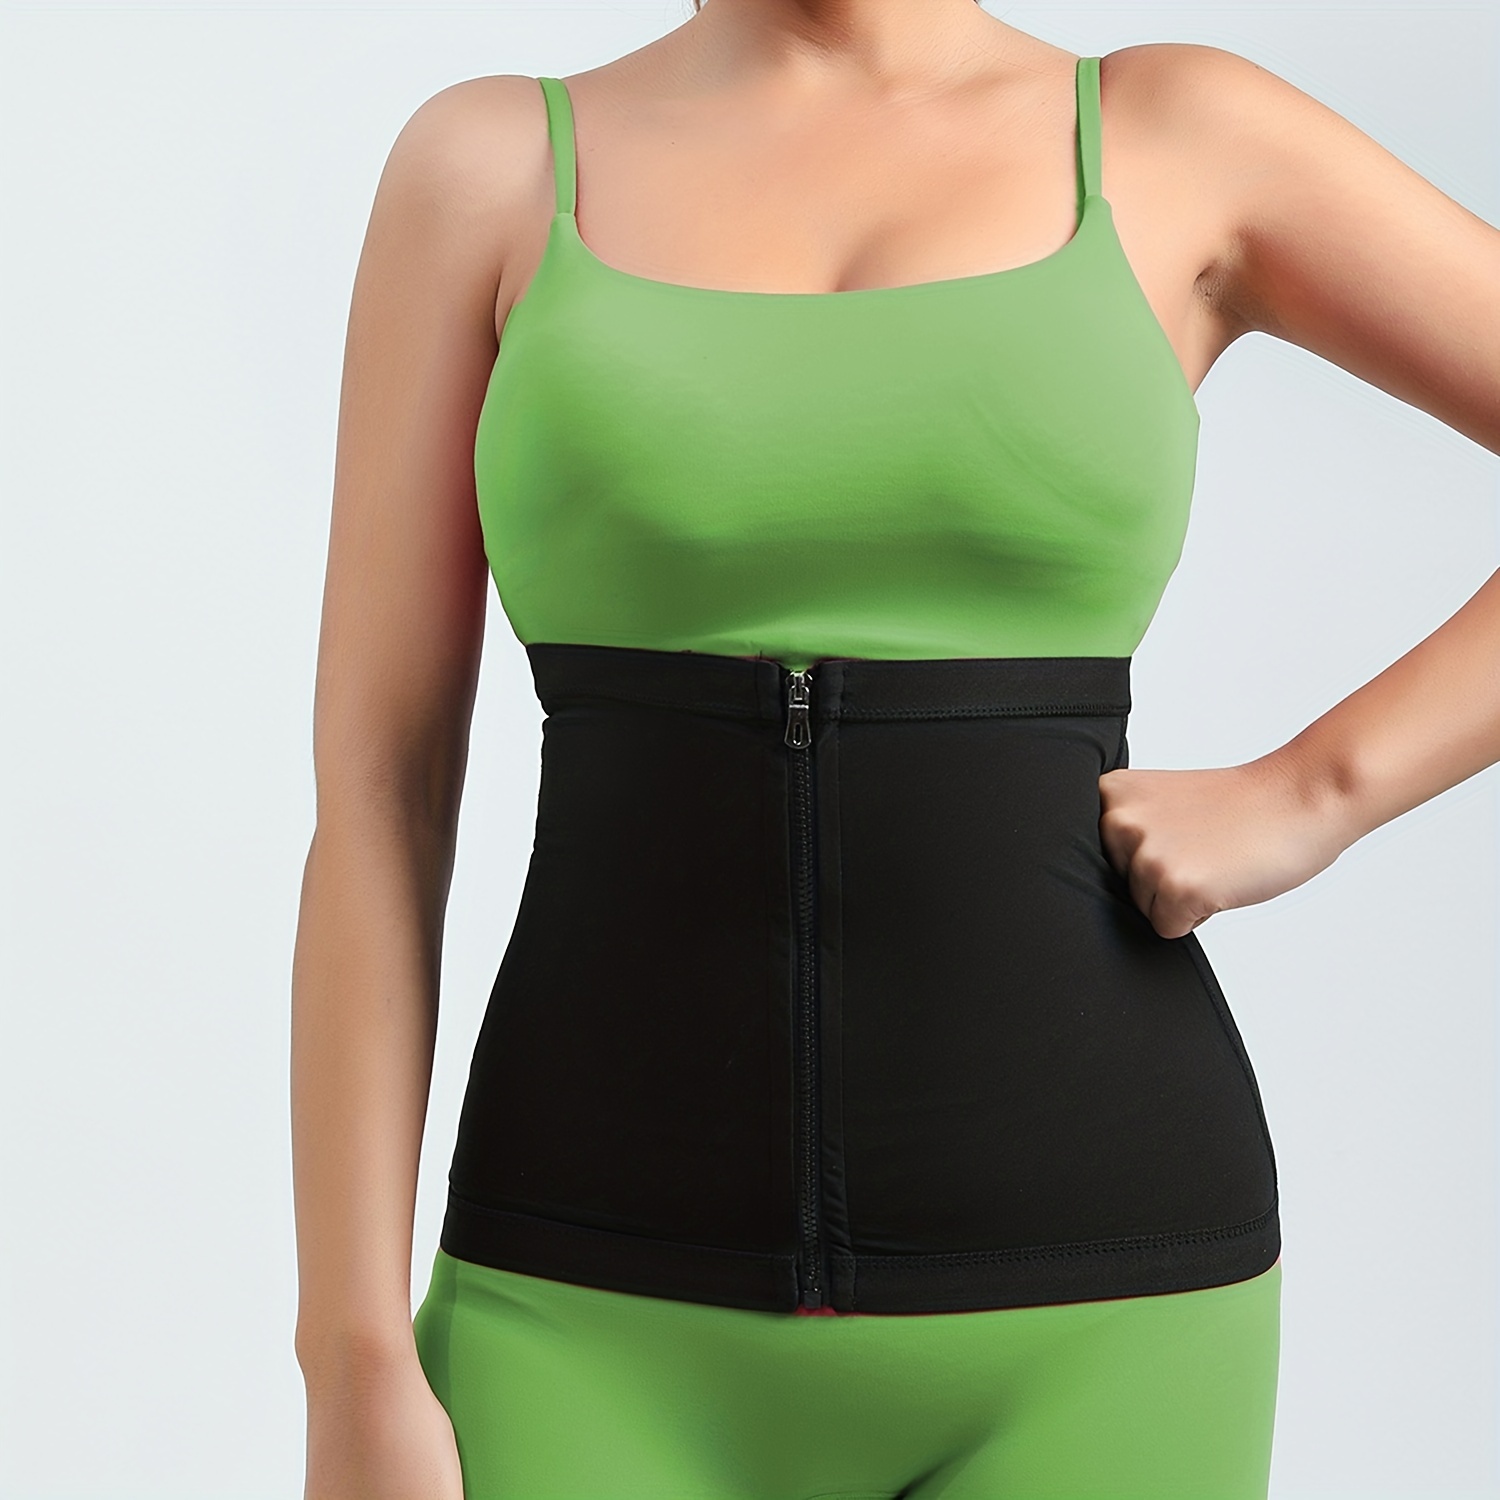 Waist Trainers to Use to Get Rid of Lower Belly Fat - Beauty and the Mist